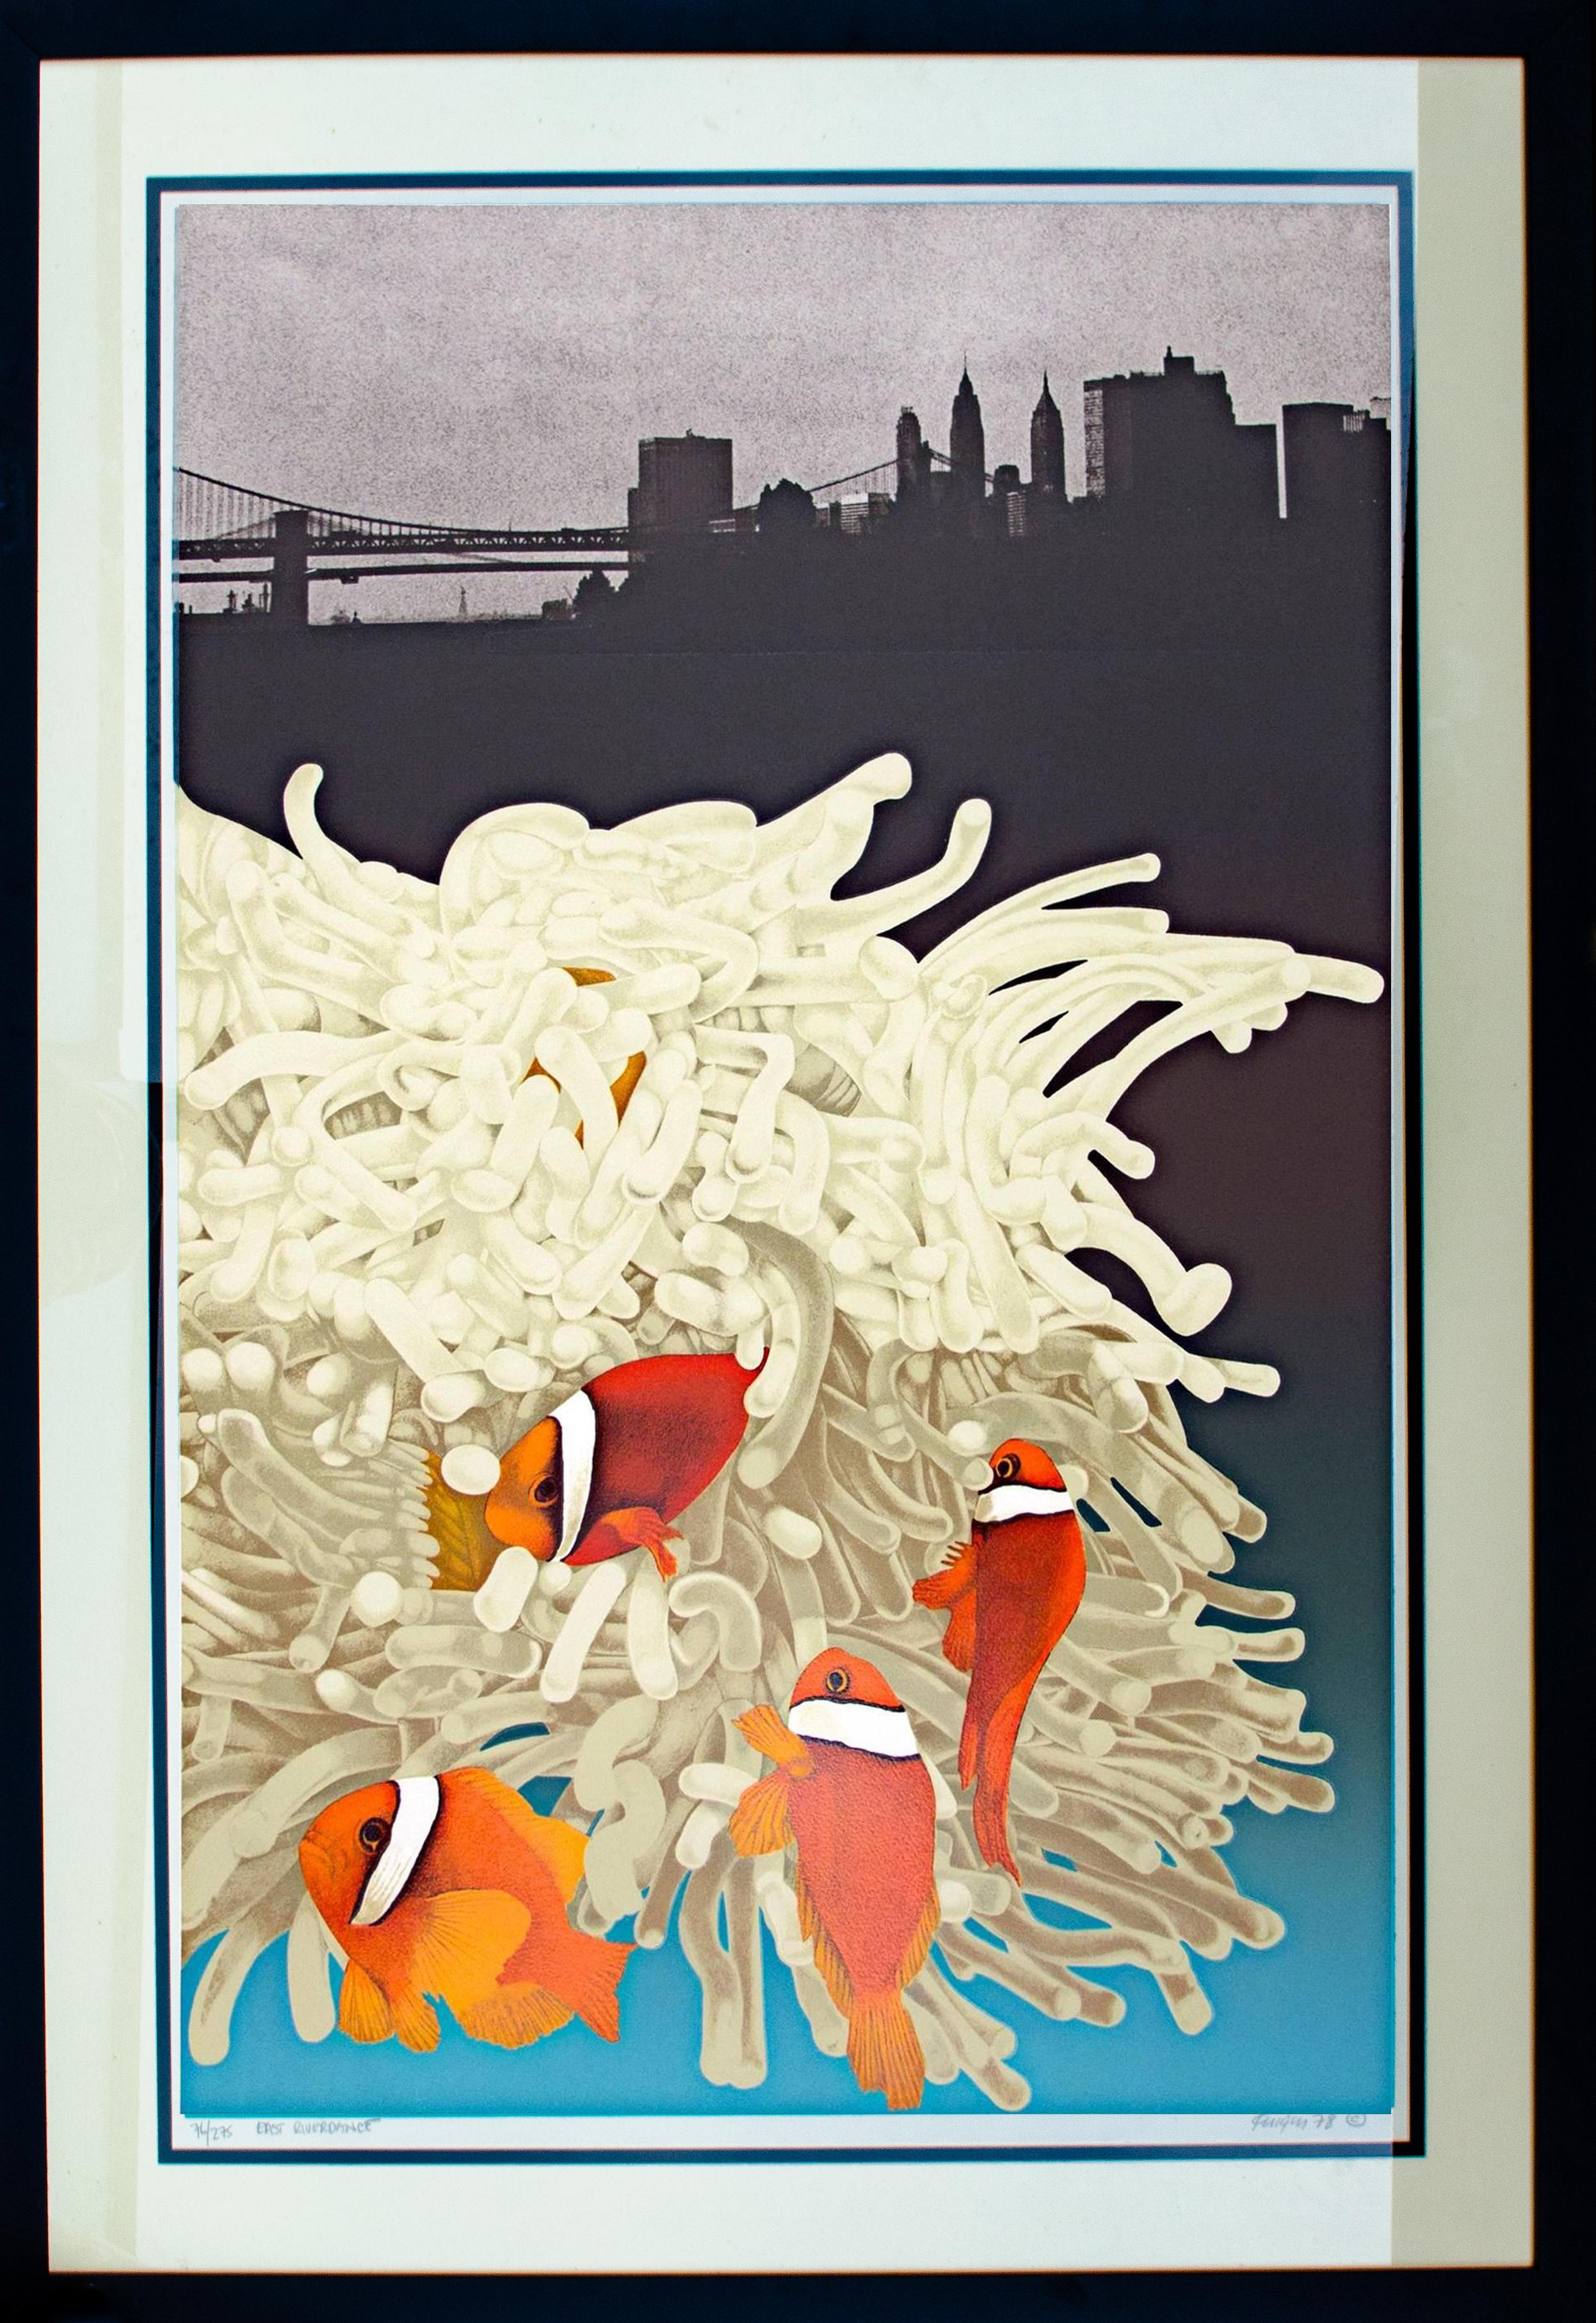 Michael Knigin (American, b. 1942)
East Riverdance, 1978
Lithograph (?)
Sight: 33 x 21 1/2 in. (image)
Framed: 41 1/8 x 29 x 3/4 in.
Signed, titled, dated, and numbered bottom
Edition 76/275

Michael Knigin attended and graduated from Tyler School